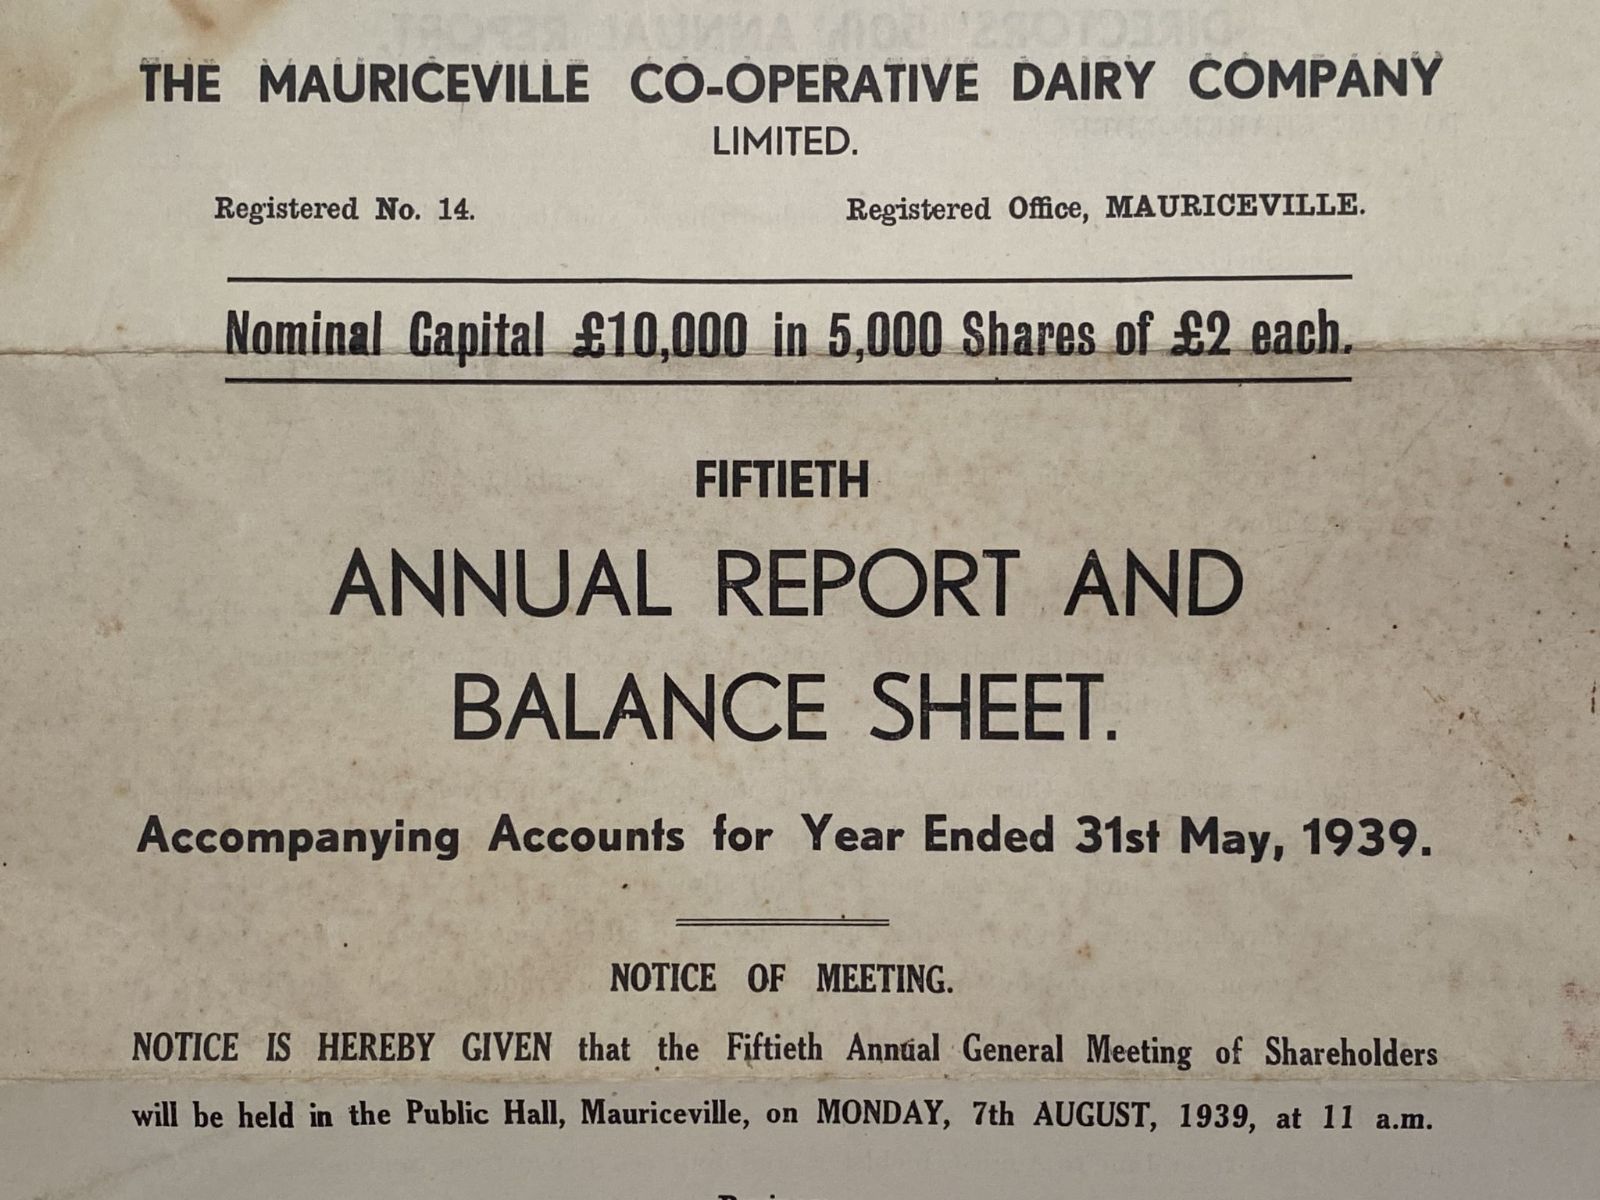 THE MAURICEVILLE CO-OP DAIRY COMPANY Ltd, Mauriceville - Annual Report 1939